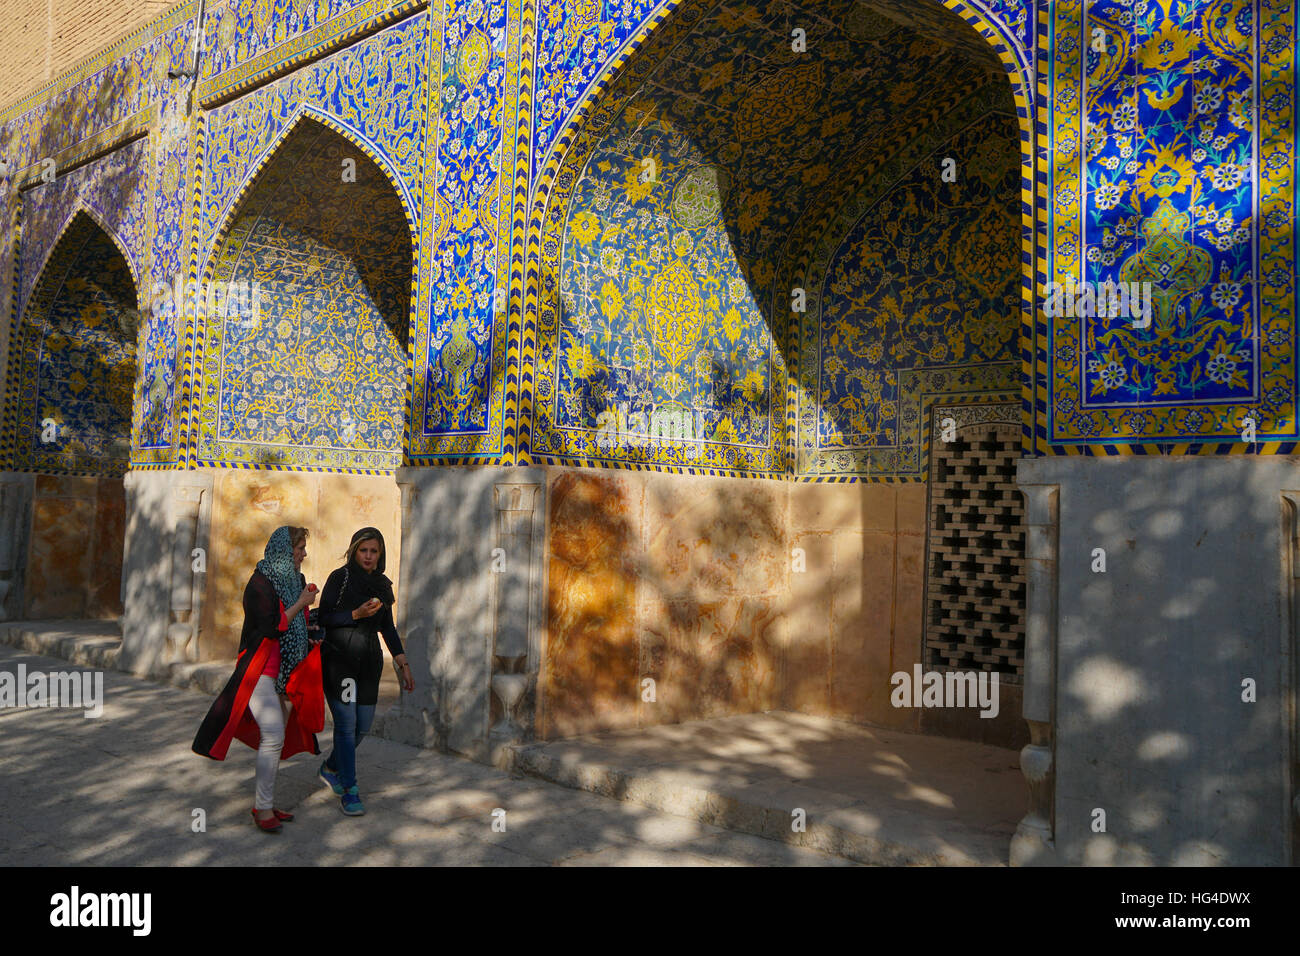 Two Iranian girls walking past courtyard walls, Imam Mosque, UNESCO, Isfahan, Iran, Middle East Stock Photo